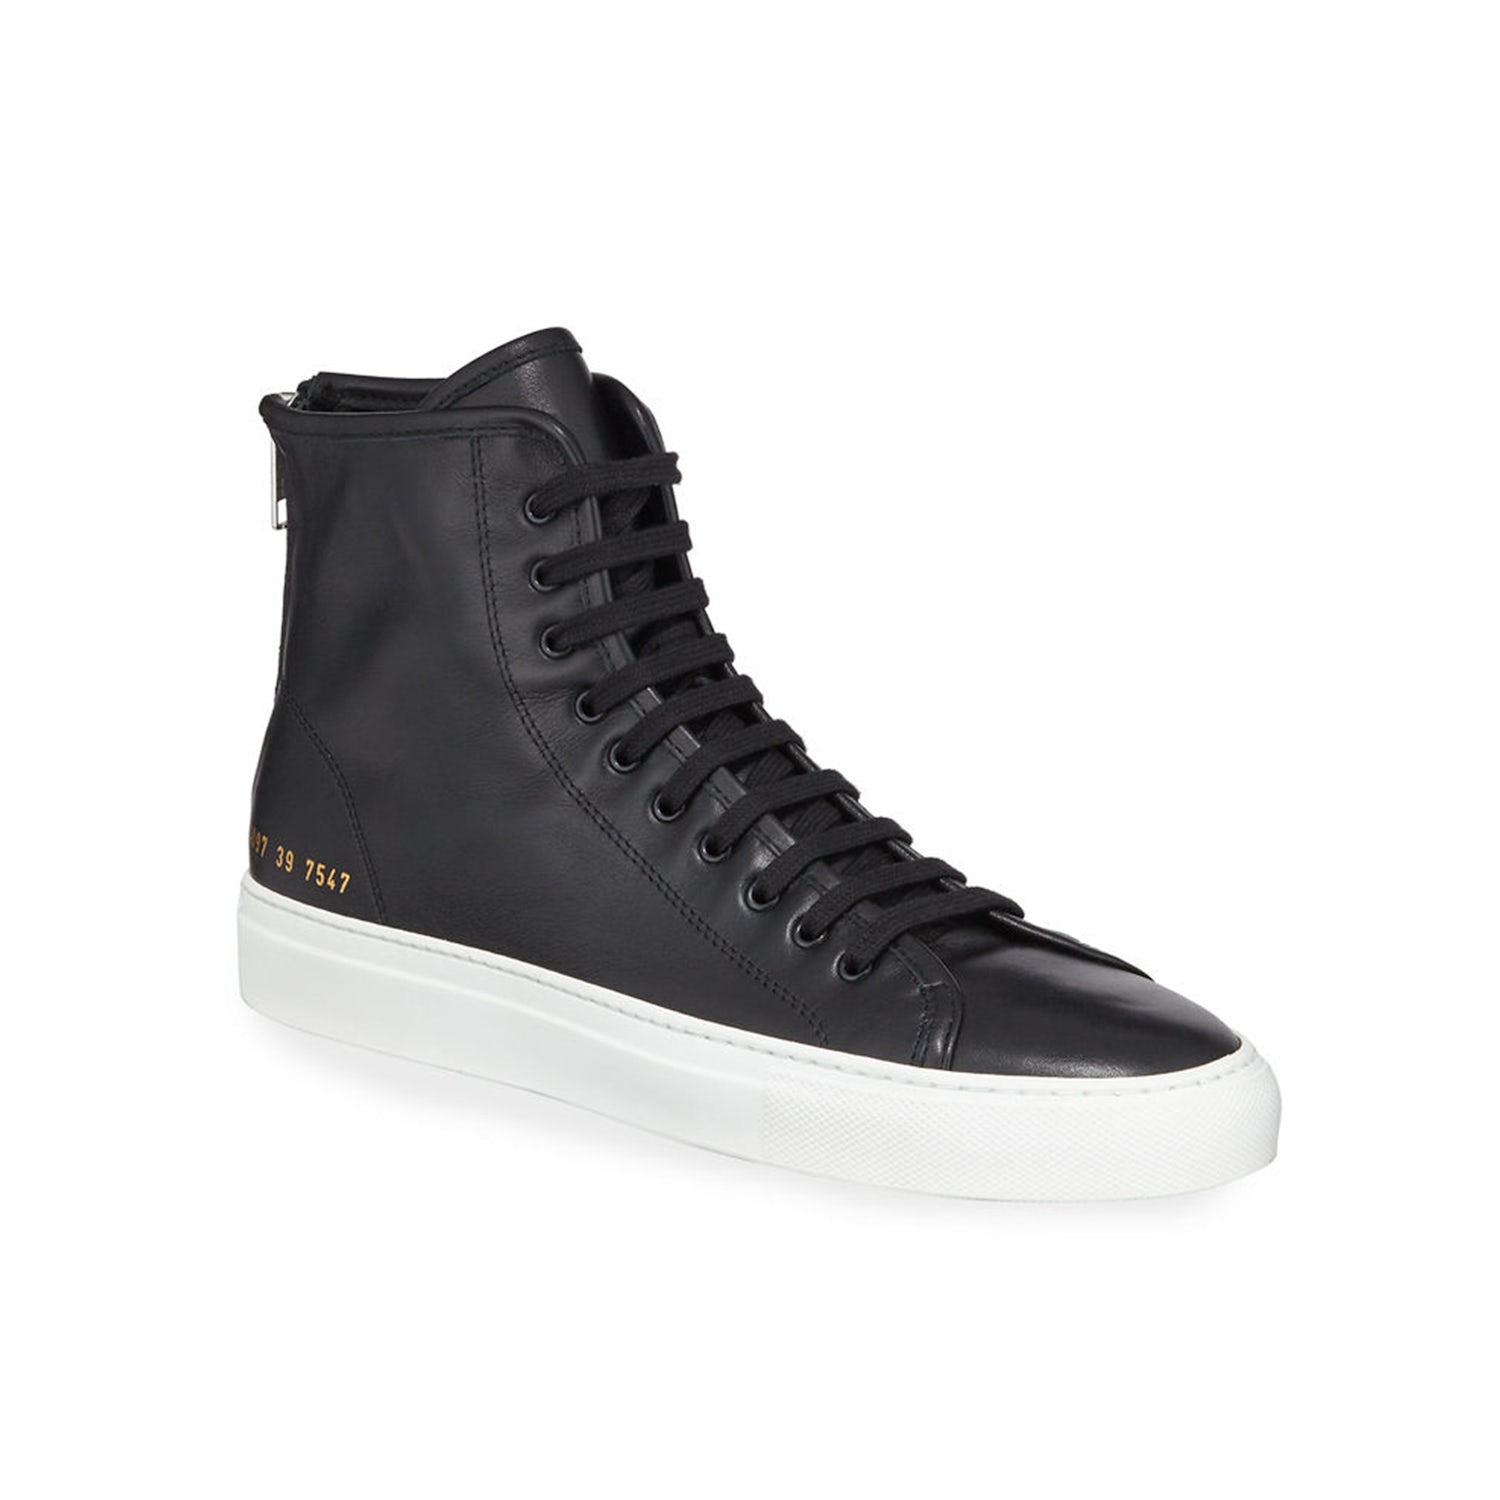 20 Best High Top Sneakers // ONE37pm